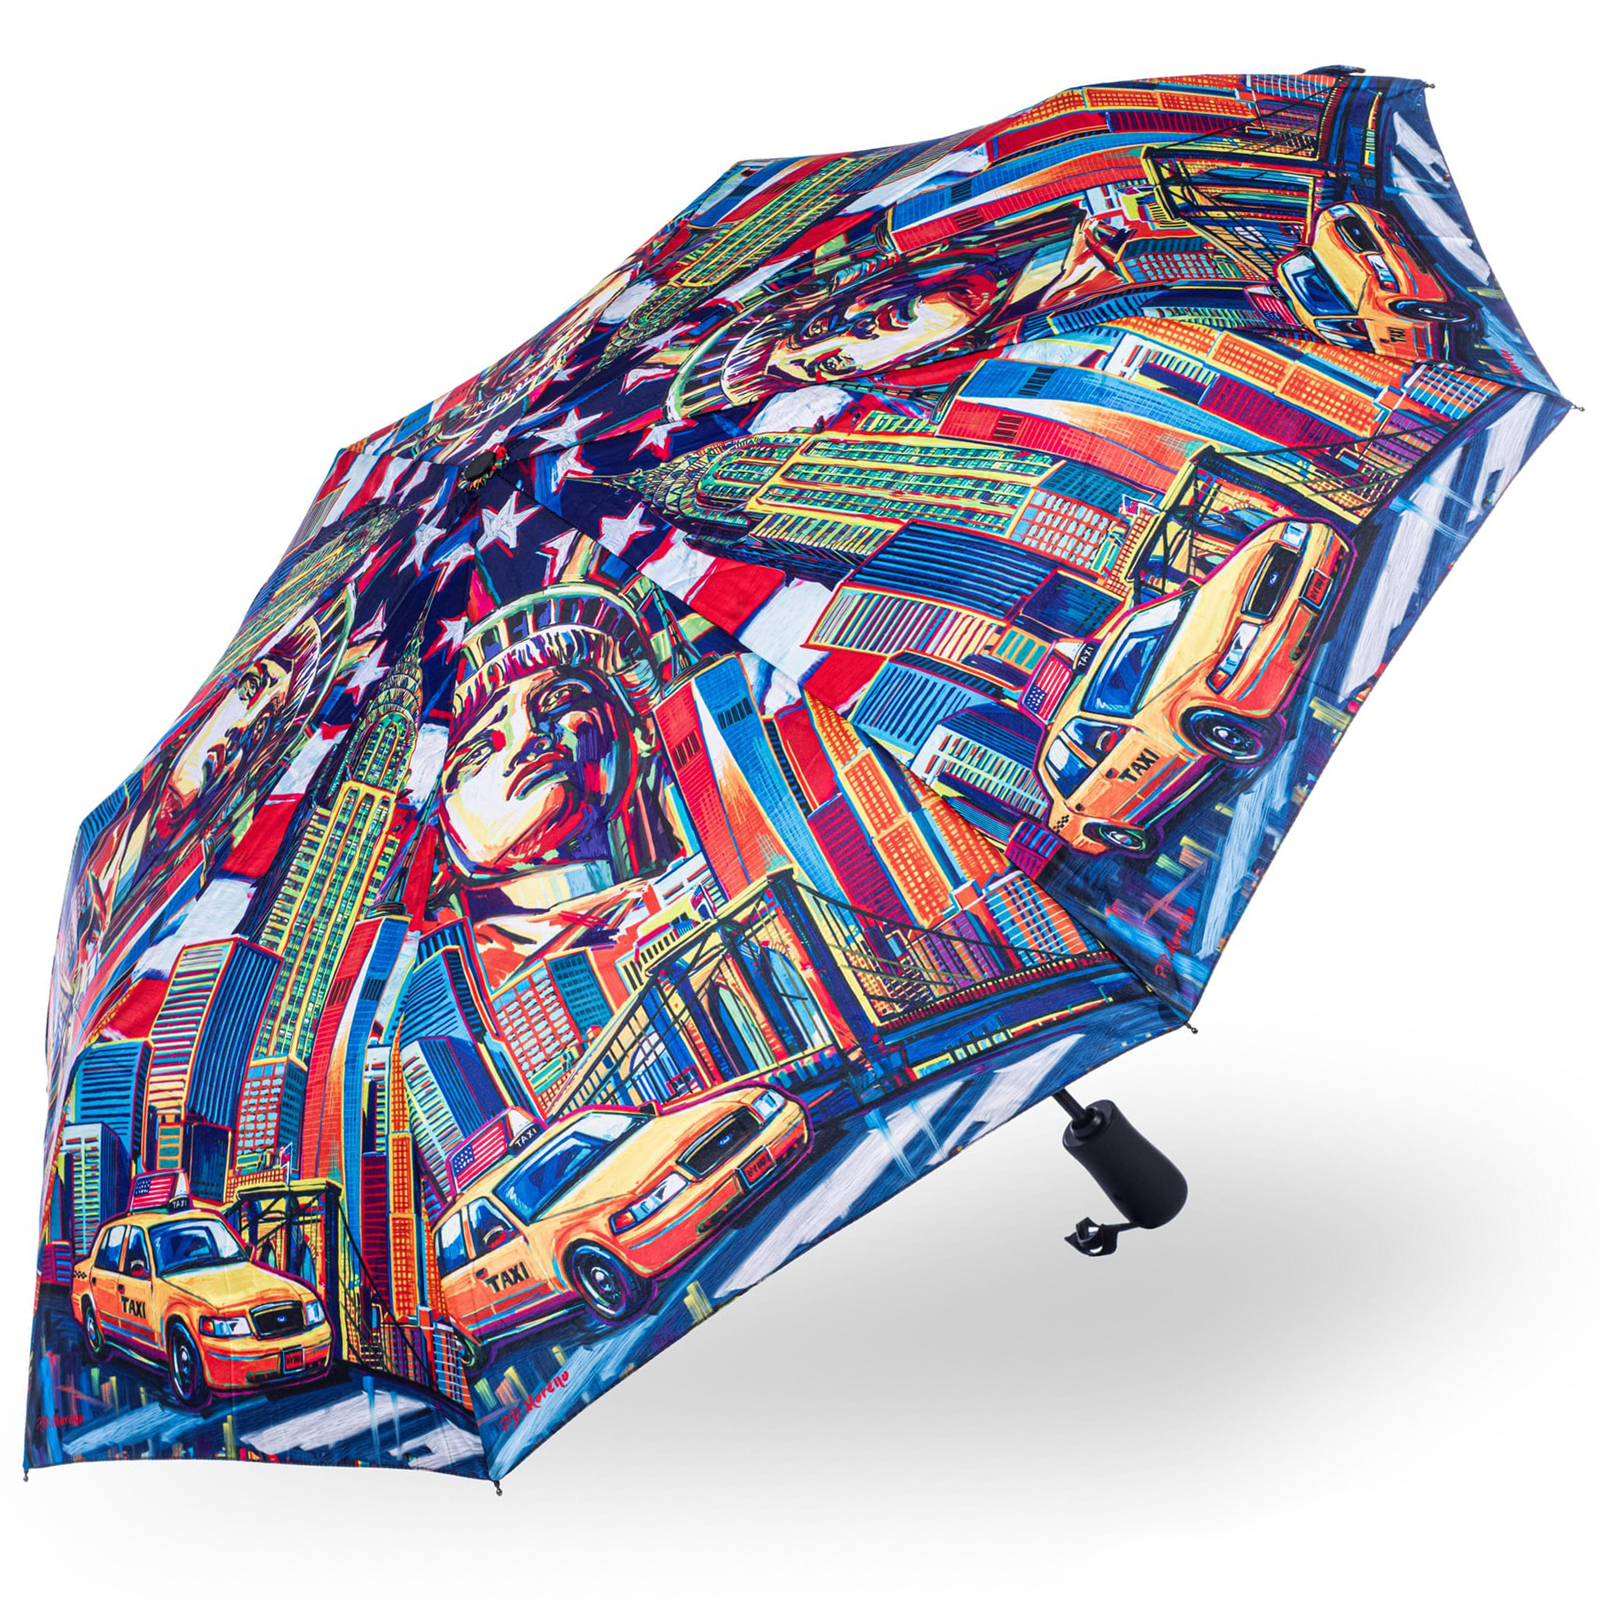 Stormking Automatic Open & Close Folding Umbrella - City Collection - New York in Colour